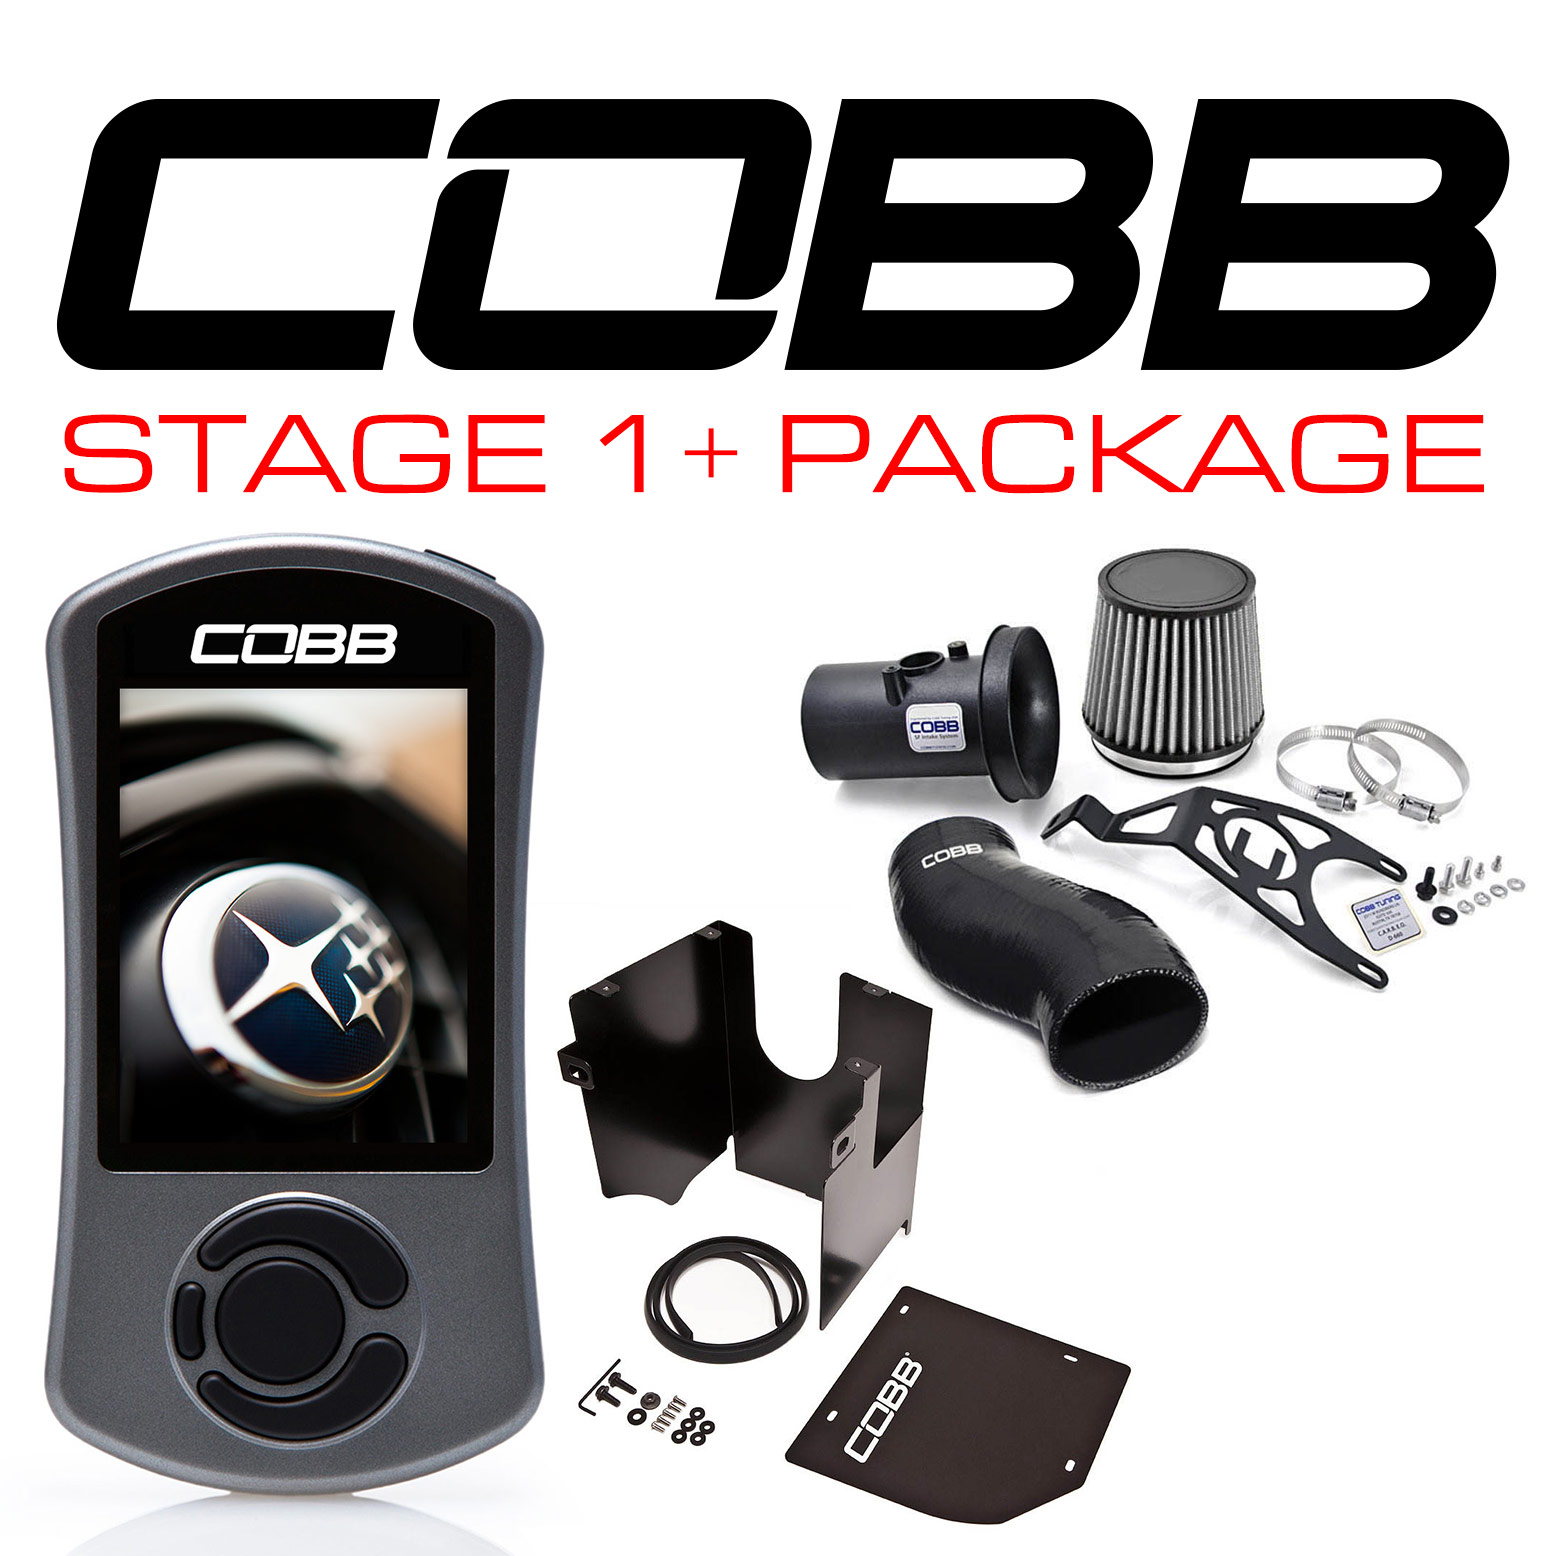 Stage Power Packages